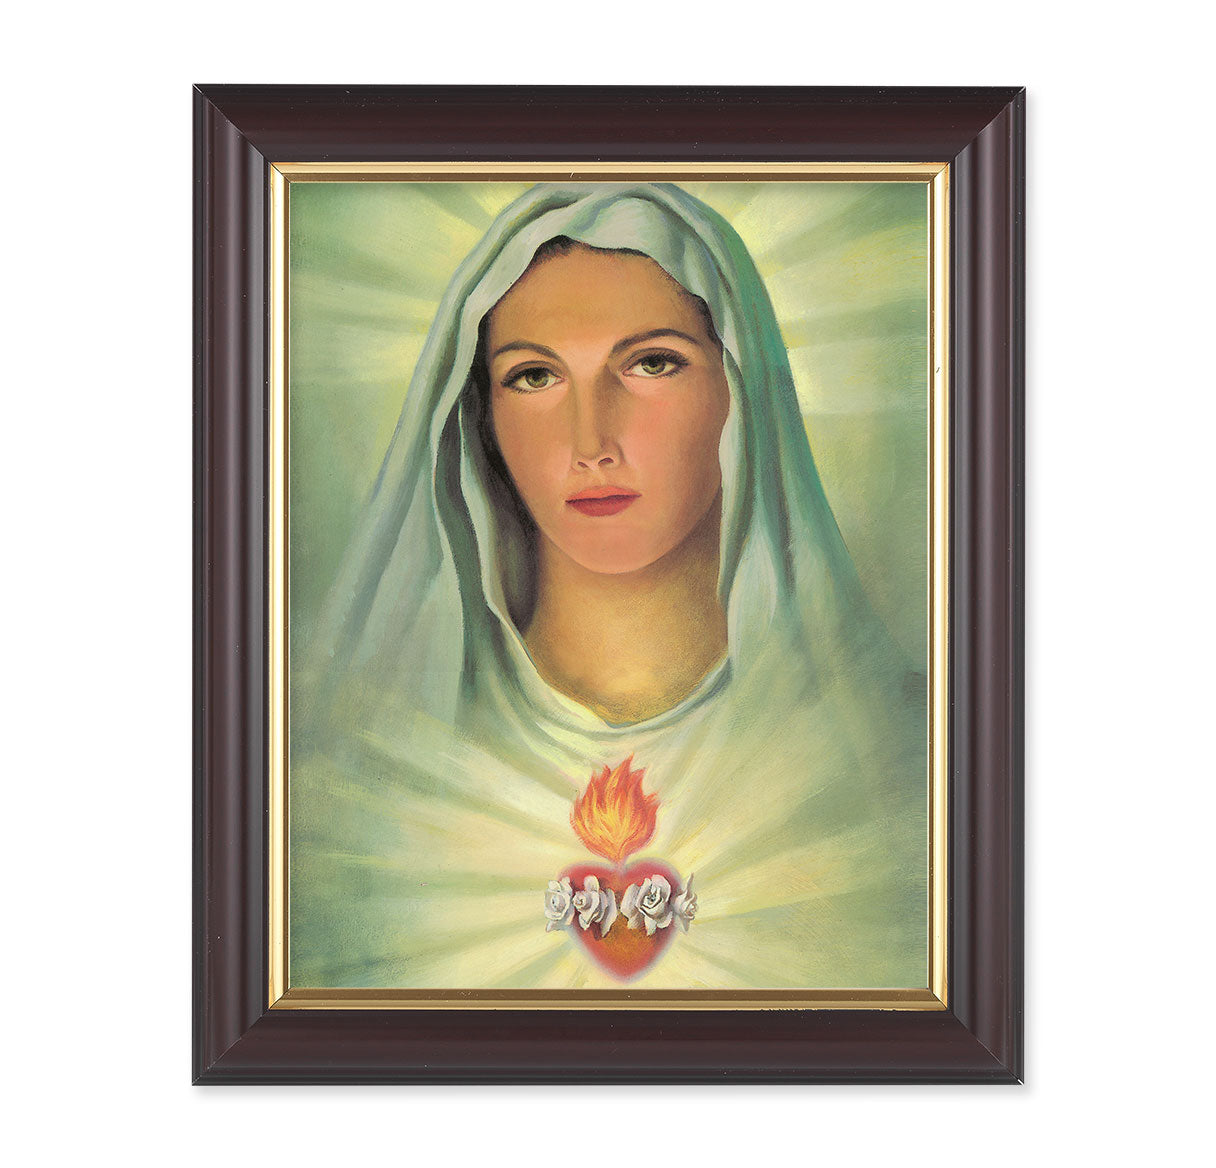 Immaculate Heart of Mary Picture Framed Wall Art Decor, Medium, Classic Fluted Dark Walnut Finished Frame with Gold-Leaf Lip